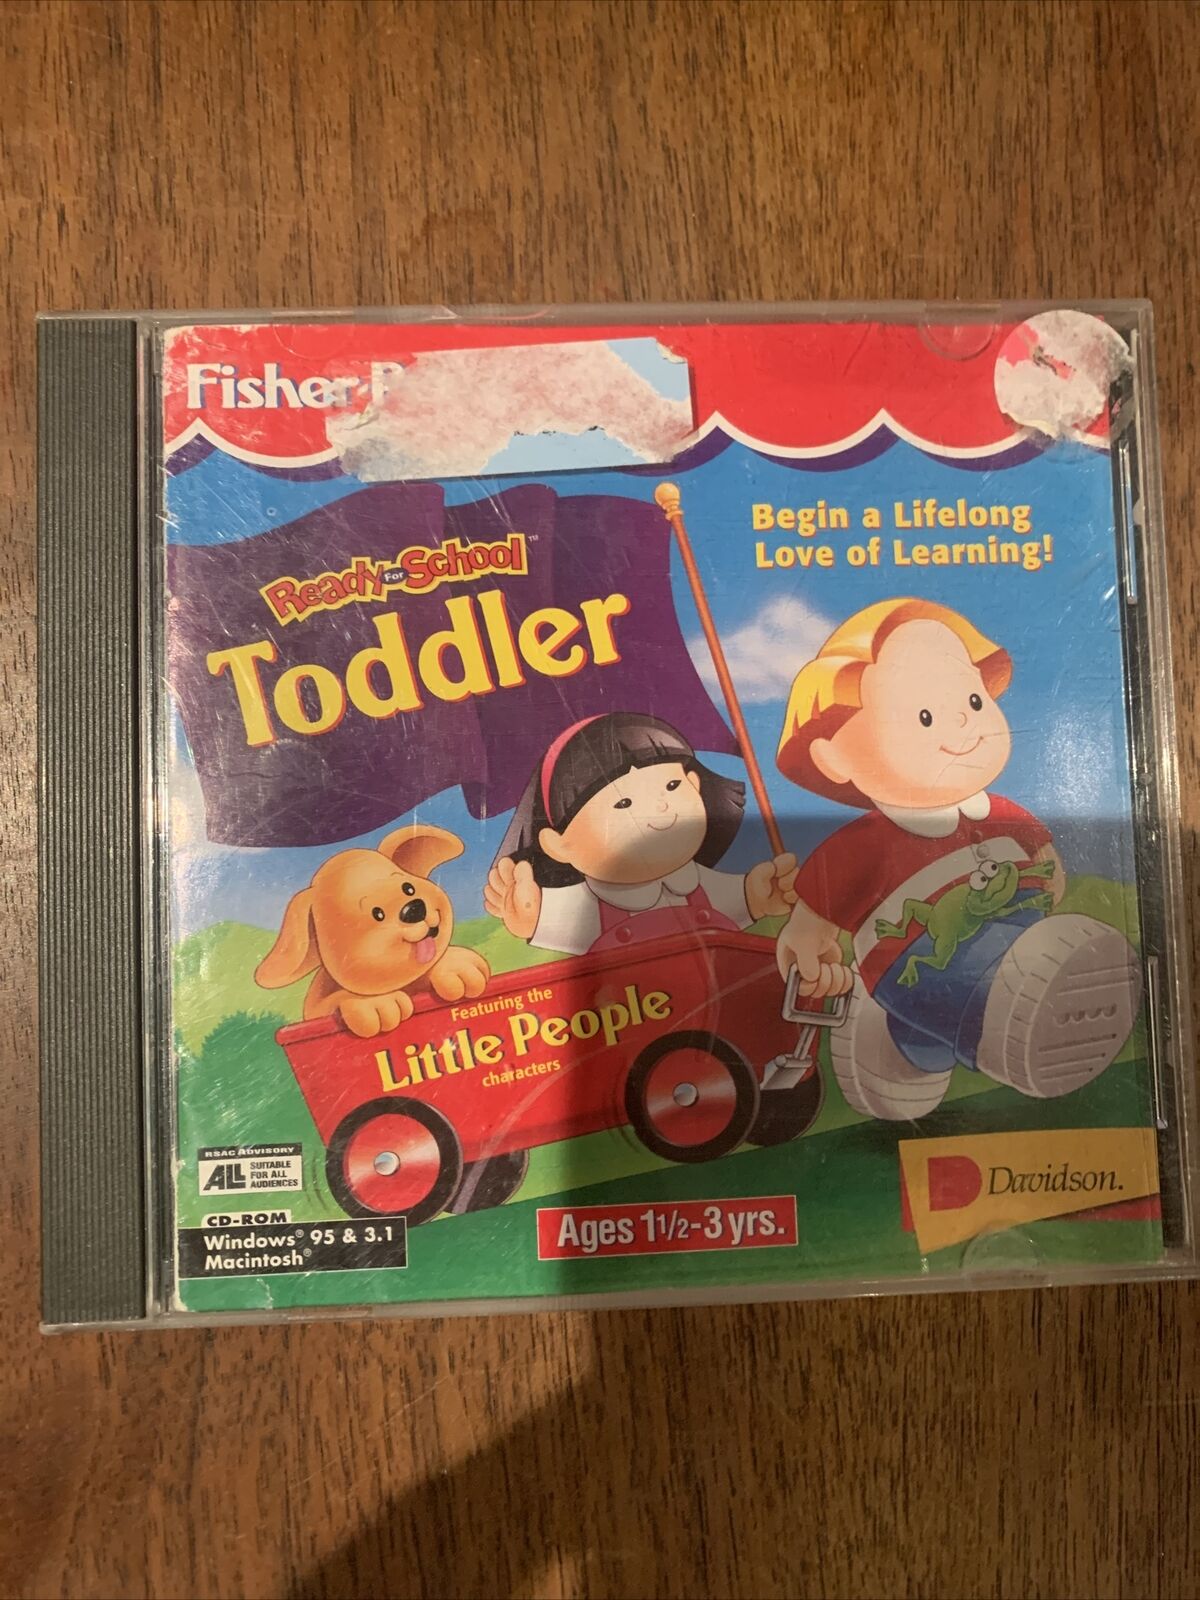 FISHER PRICE READY FOR SCHOOL TODDLER / CD-ROM / AGES 1.5 - 3 YEARS